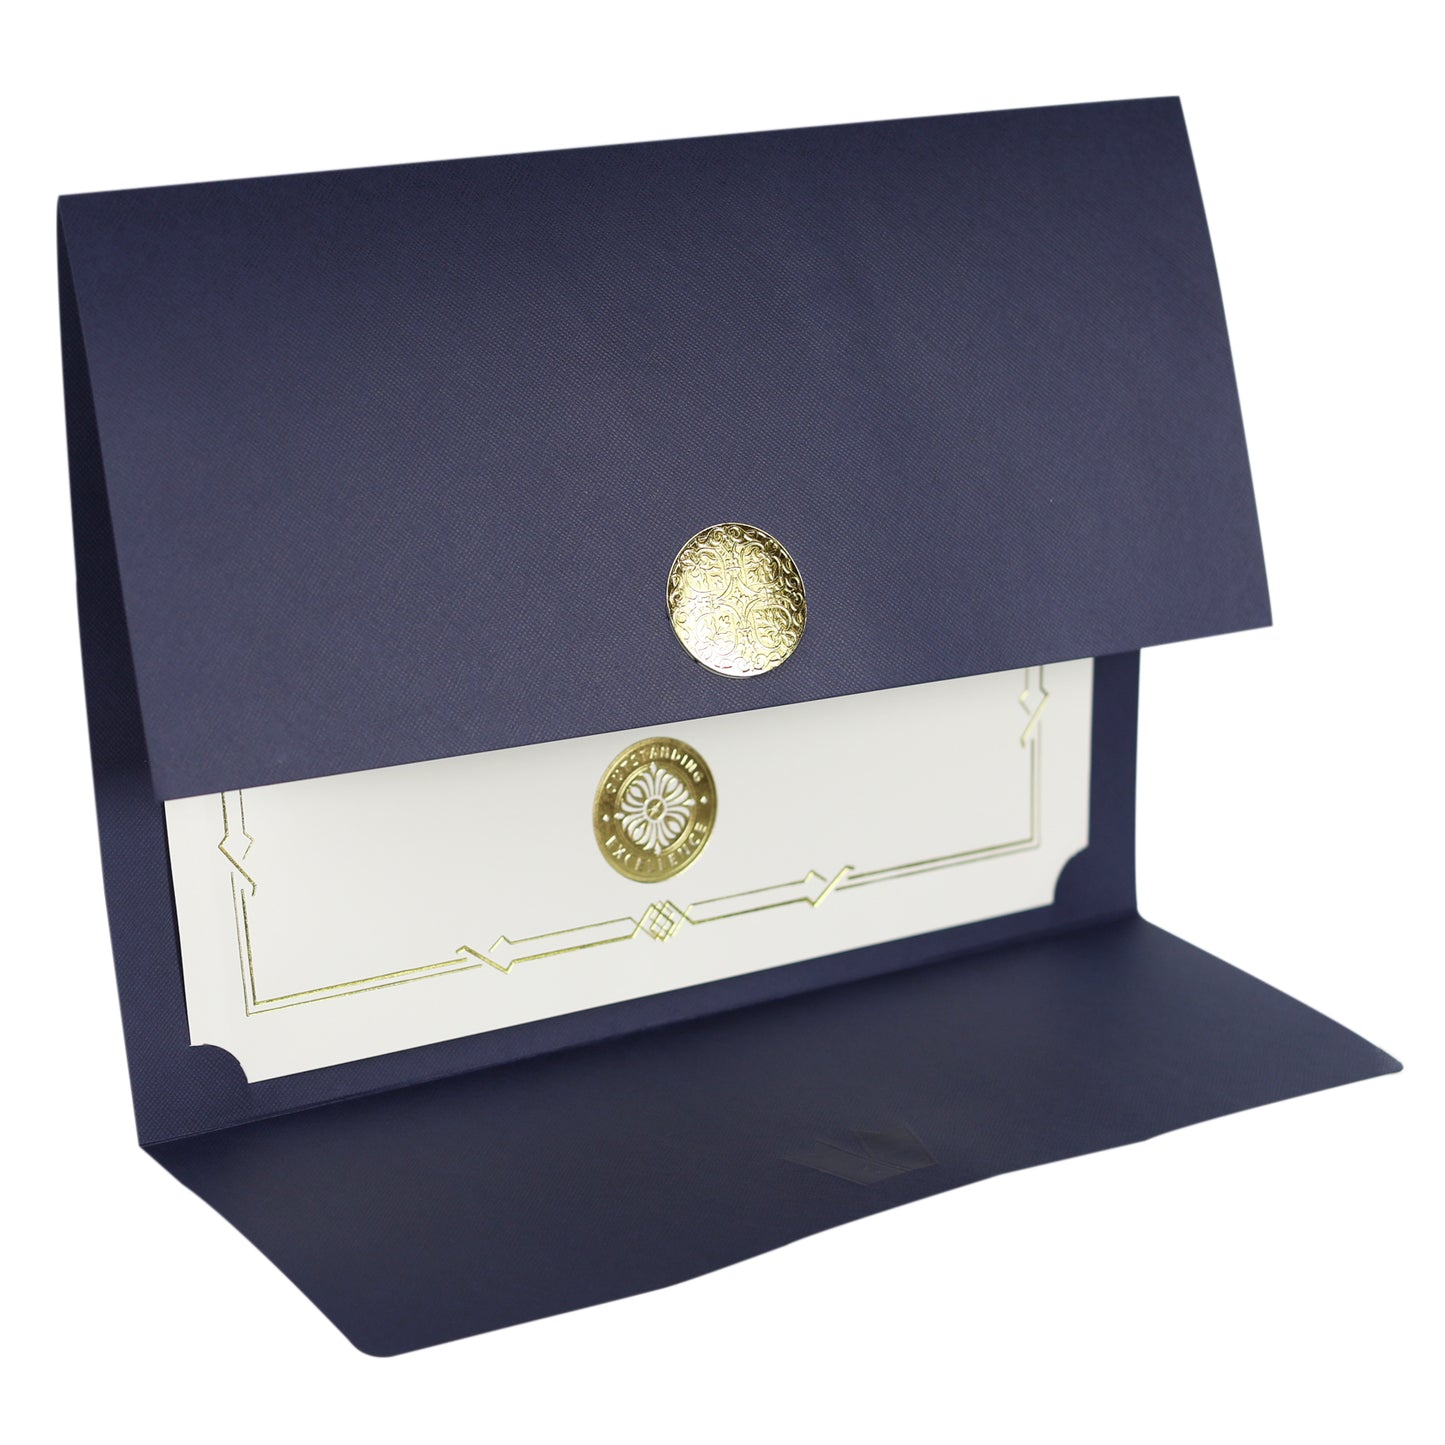 St. James® Certificate Holders/Document Covers/Diploma Holders, Navy Blue, Gold Award Seal with Red Ribbon, Pack of 5, 83815